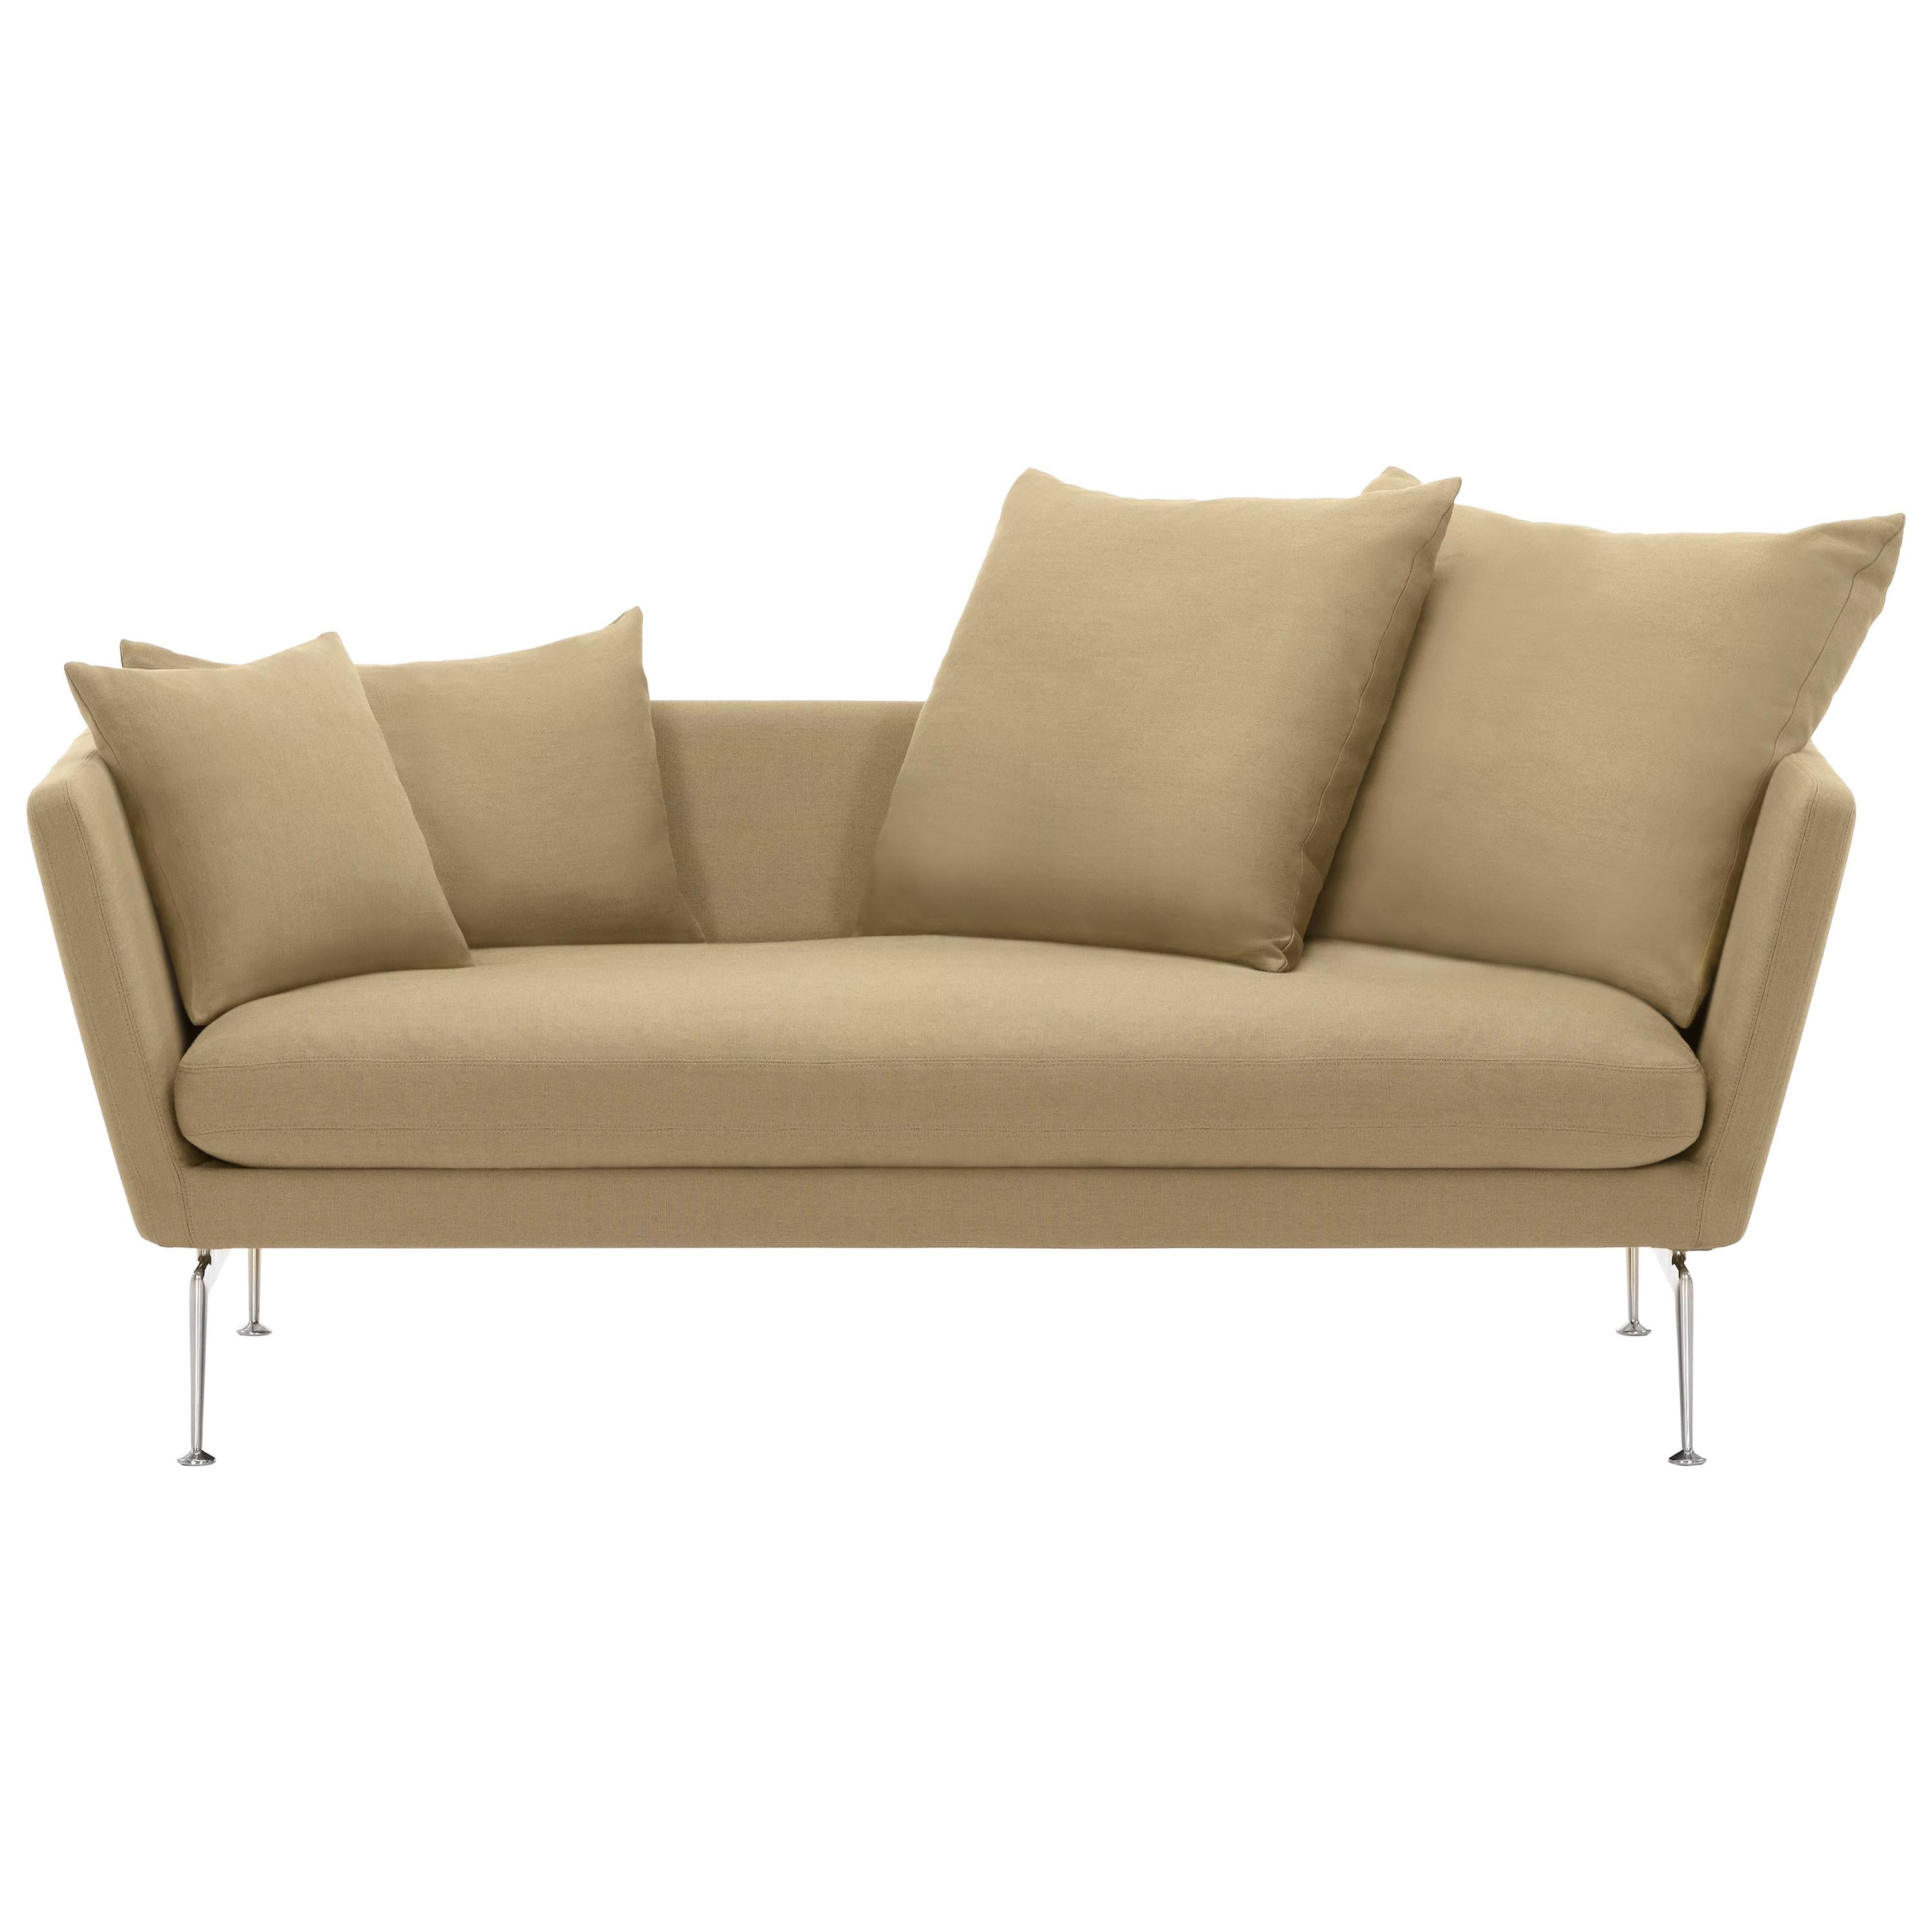 Vitra Suita Sofa Two-Seat in Parchment Olimpo by Antonio Citterio For Sale